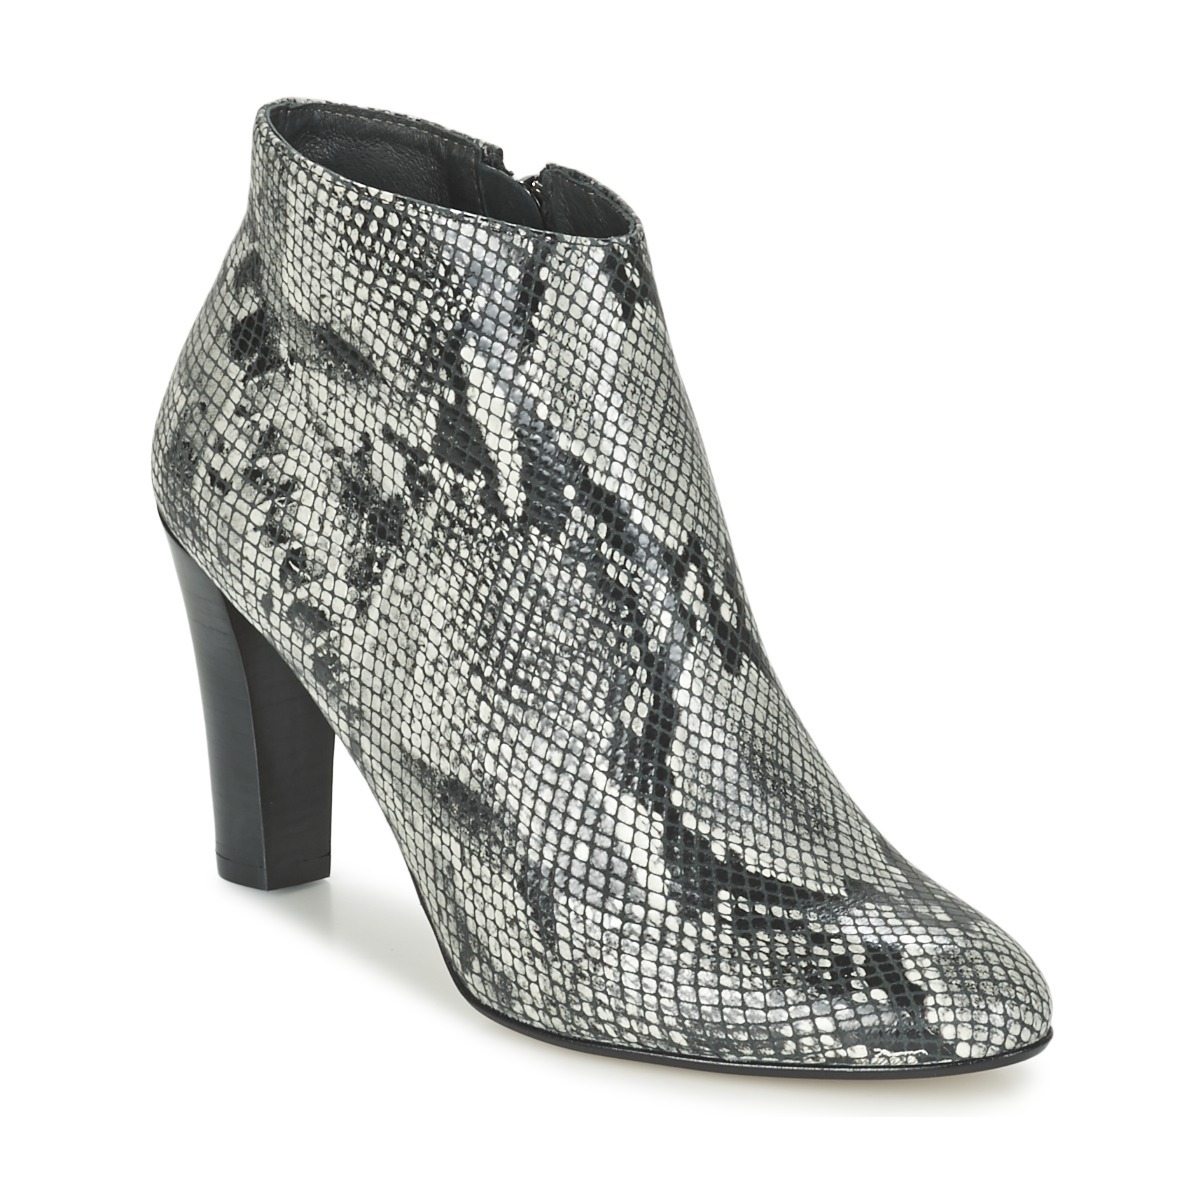 Grey Ankle Boots Spartoo Betty London Woman GOOFASH